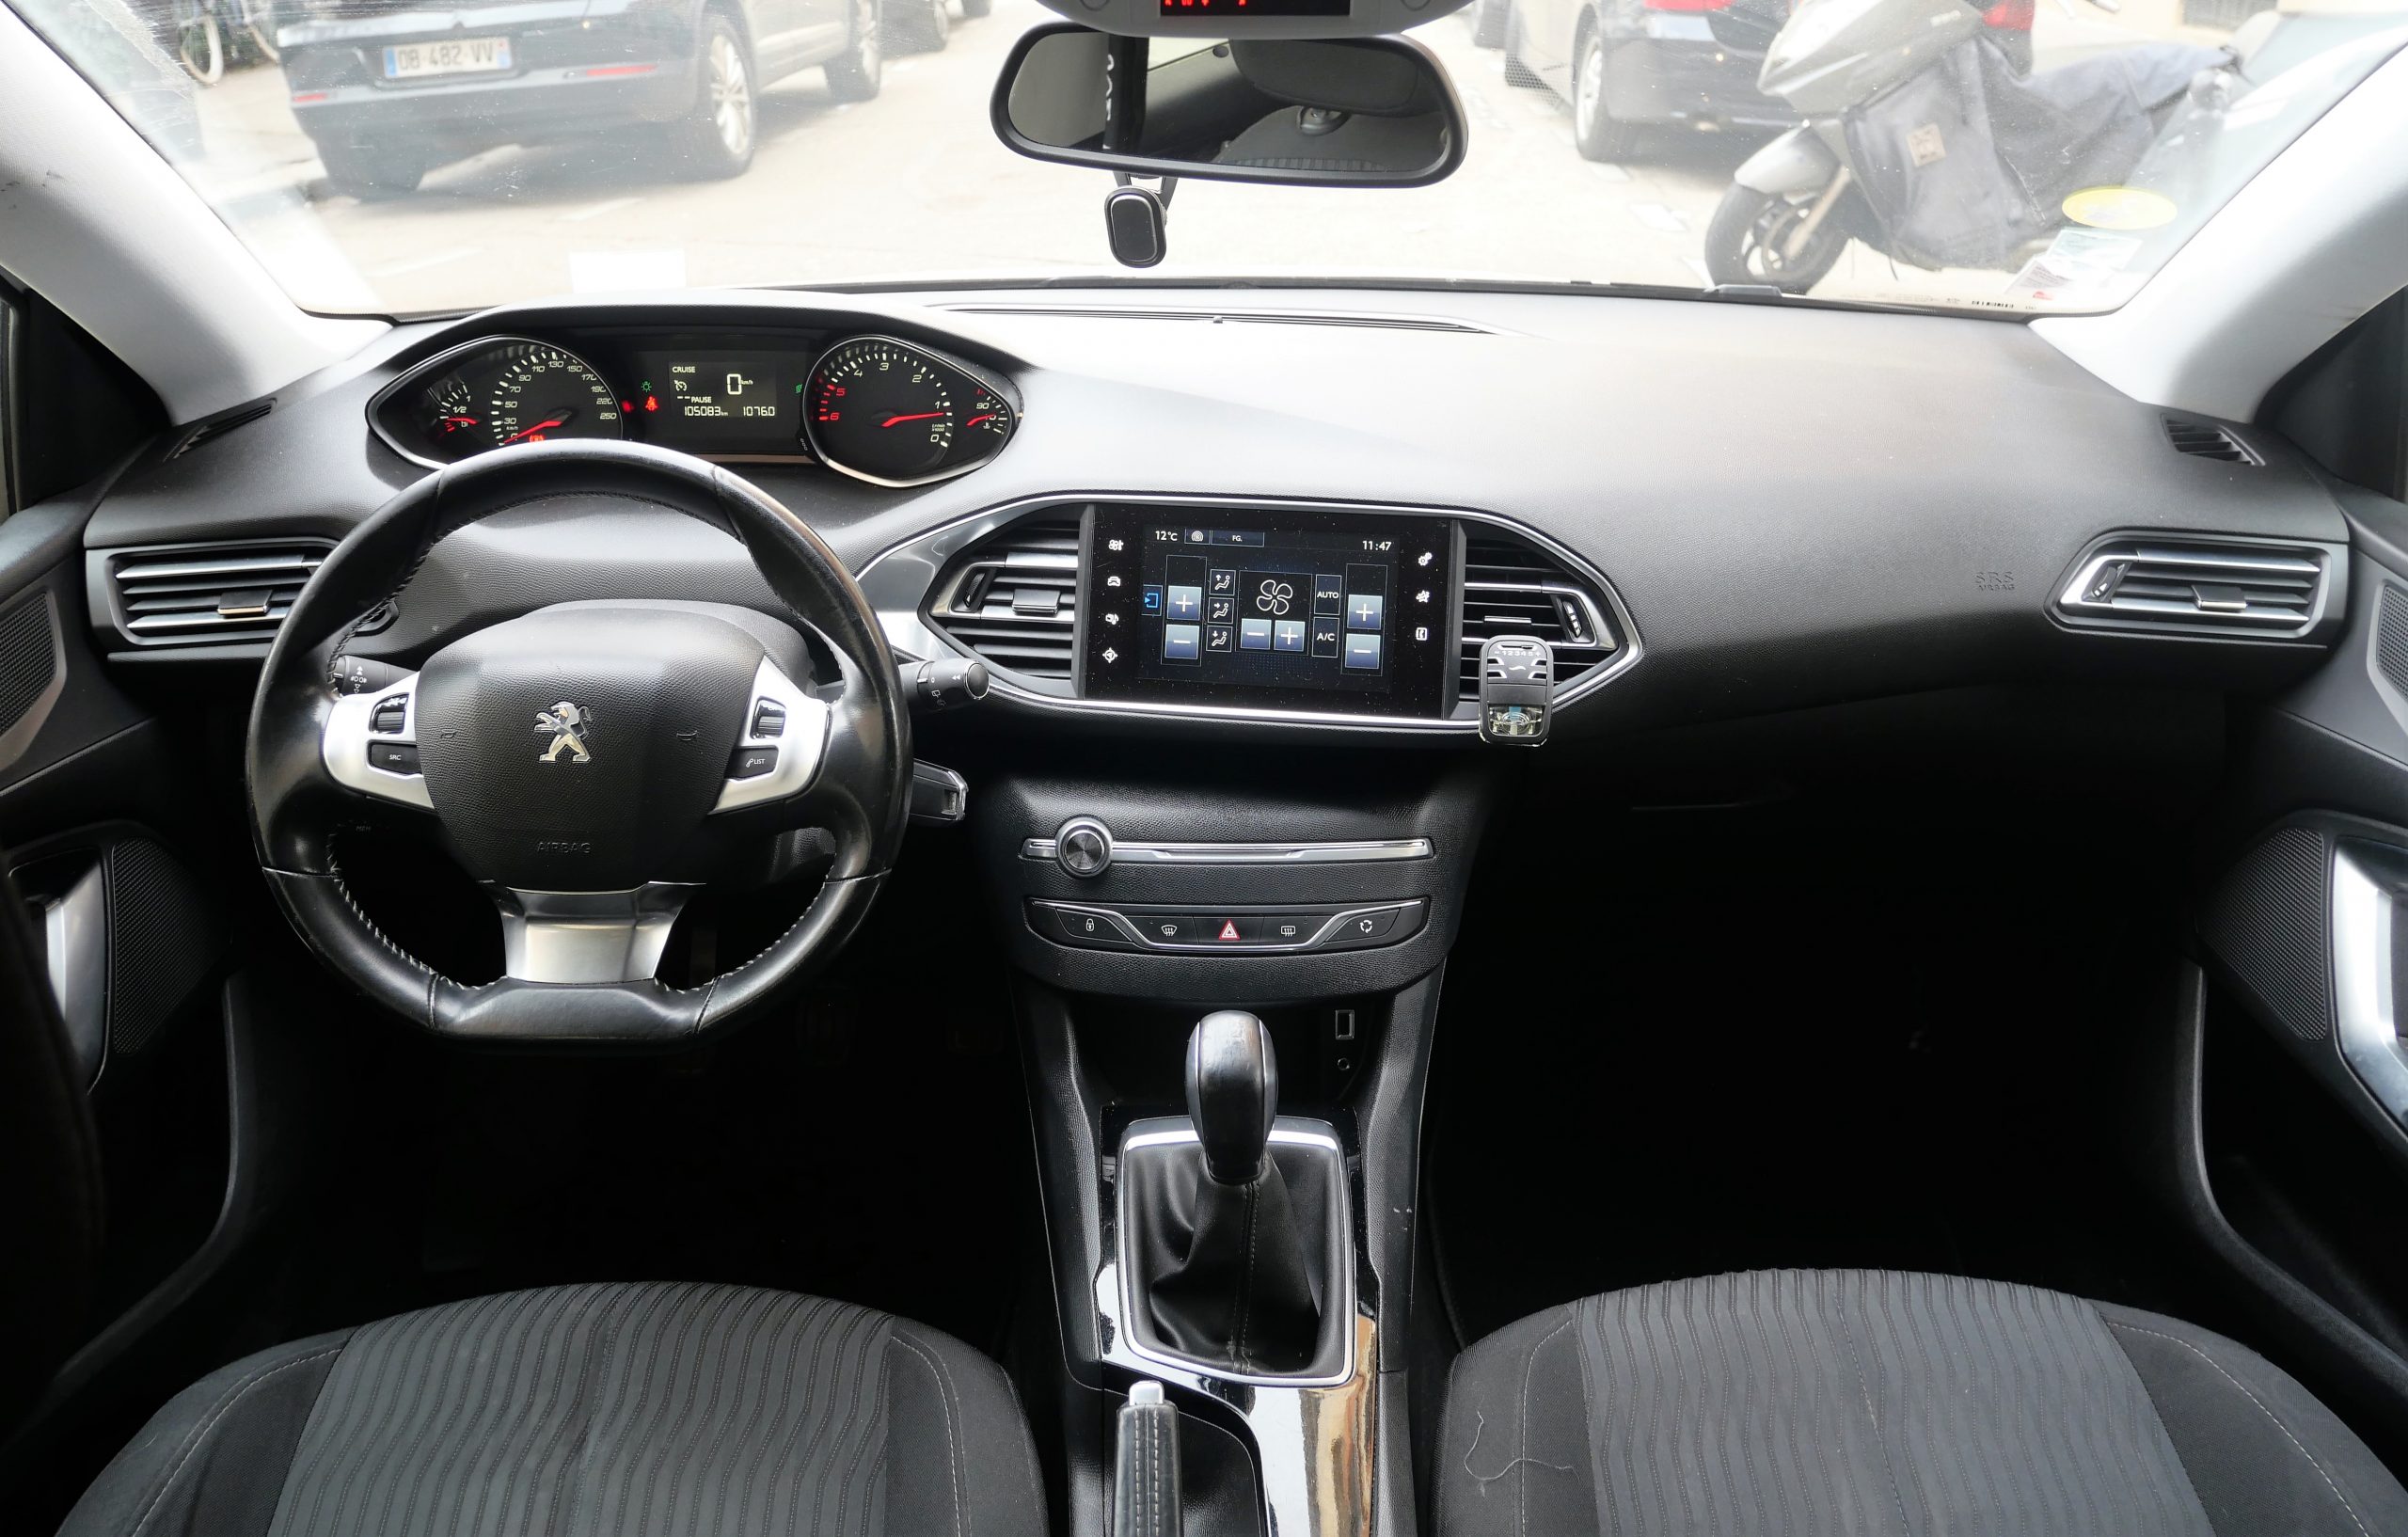 PEUGEOT 308 BUSINESS 1.6 HDi 99 CH 12